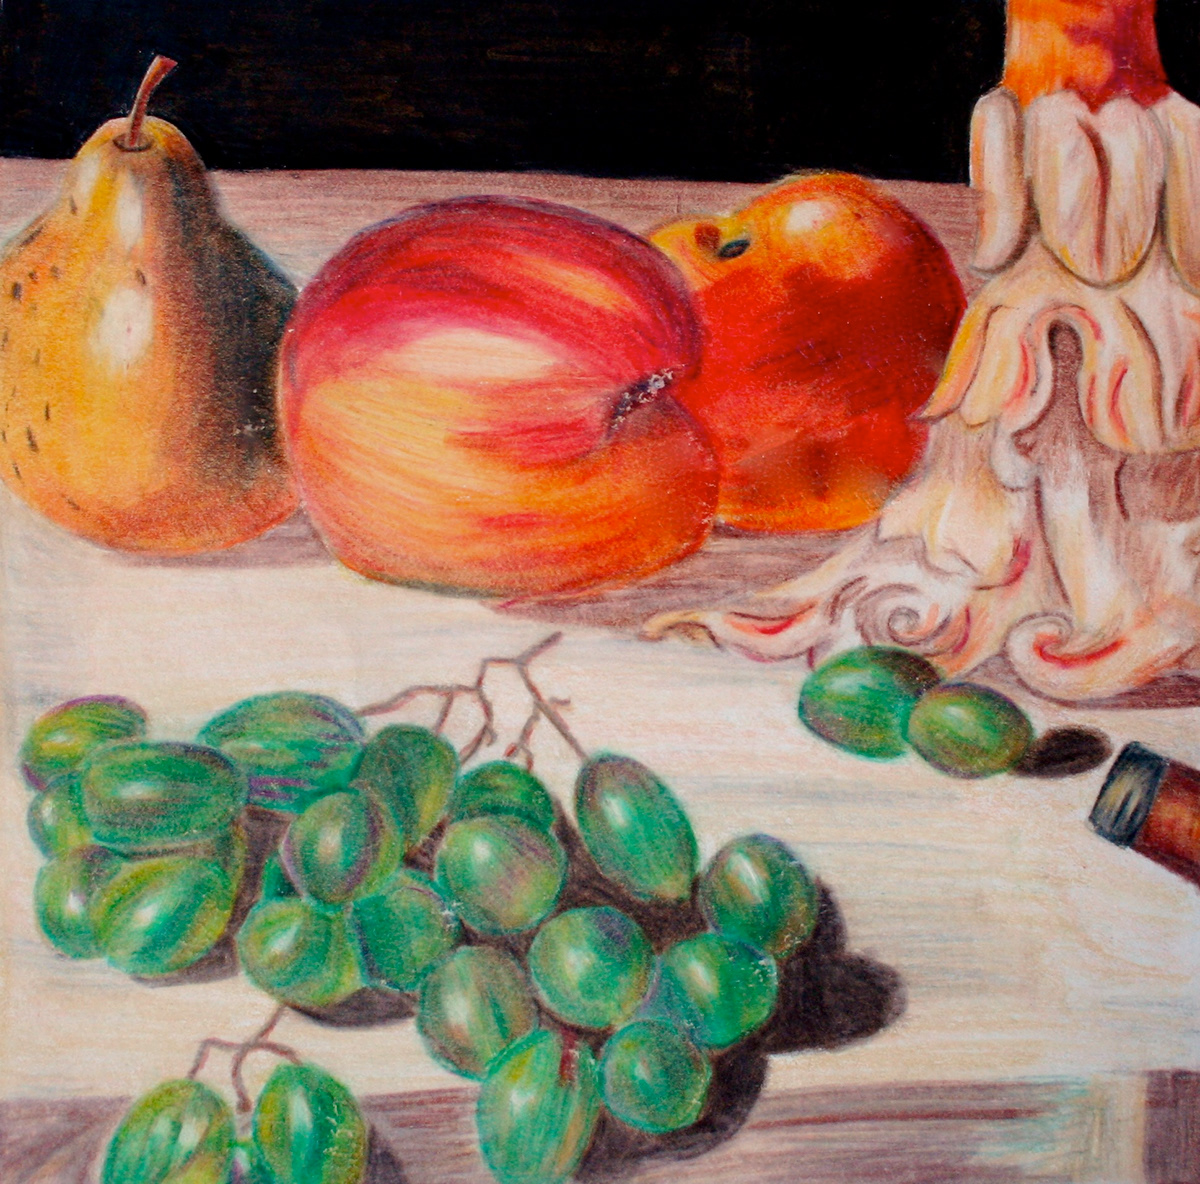 color pencil illustrations fine art still life ice cream salad women's rights book covers posters goldfish apple trucks Shells firehydrens the shining